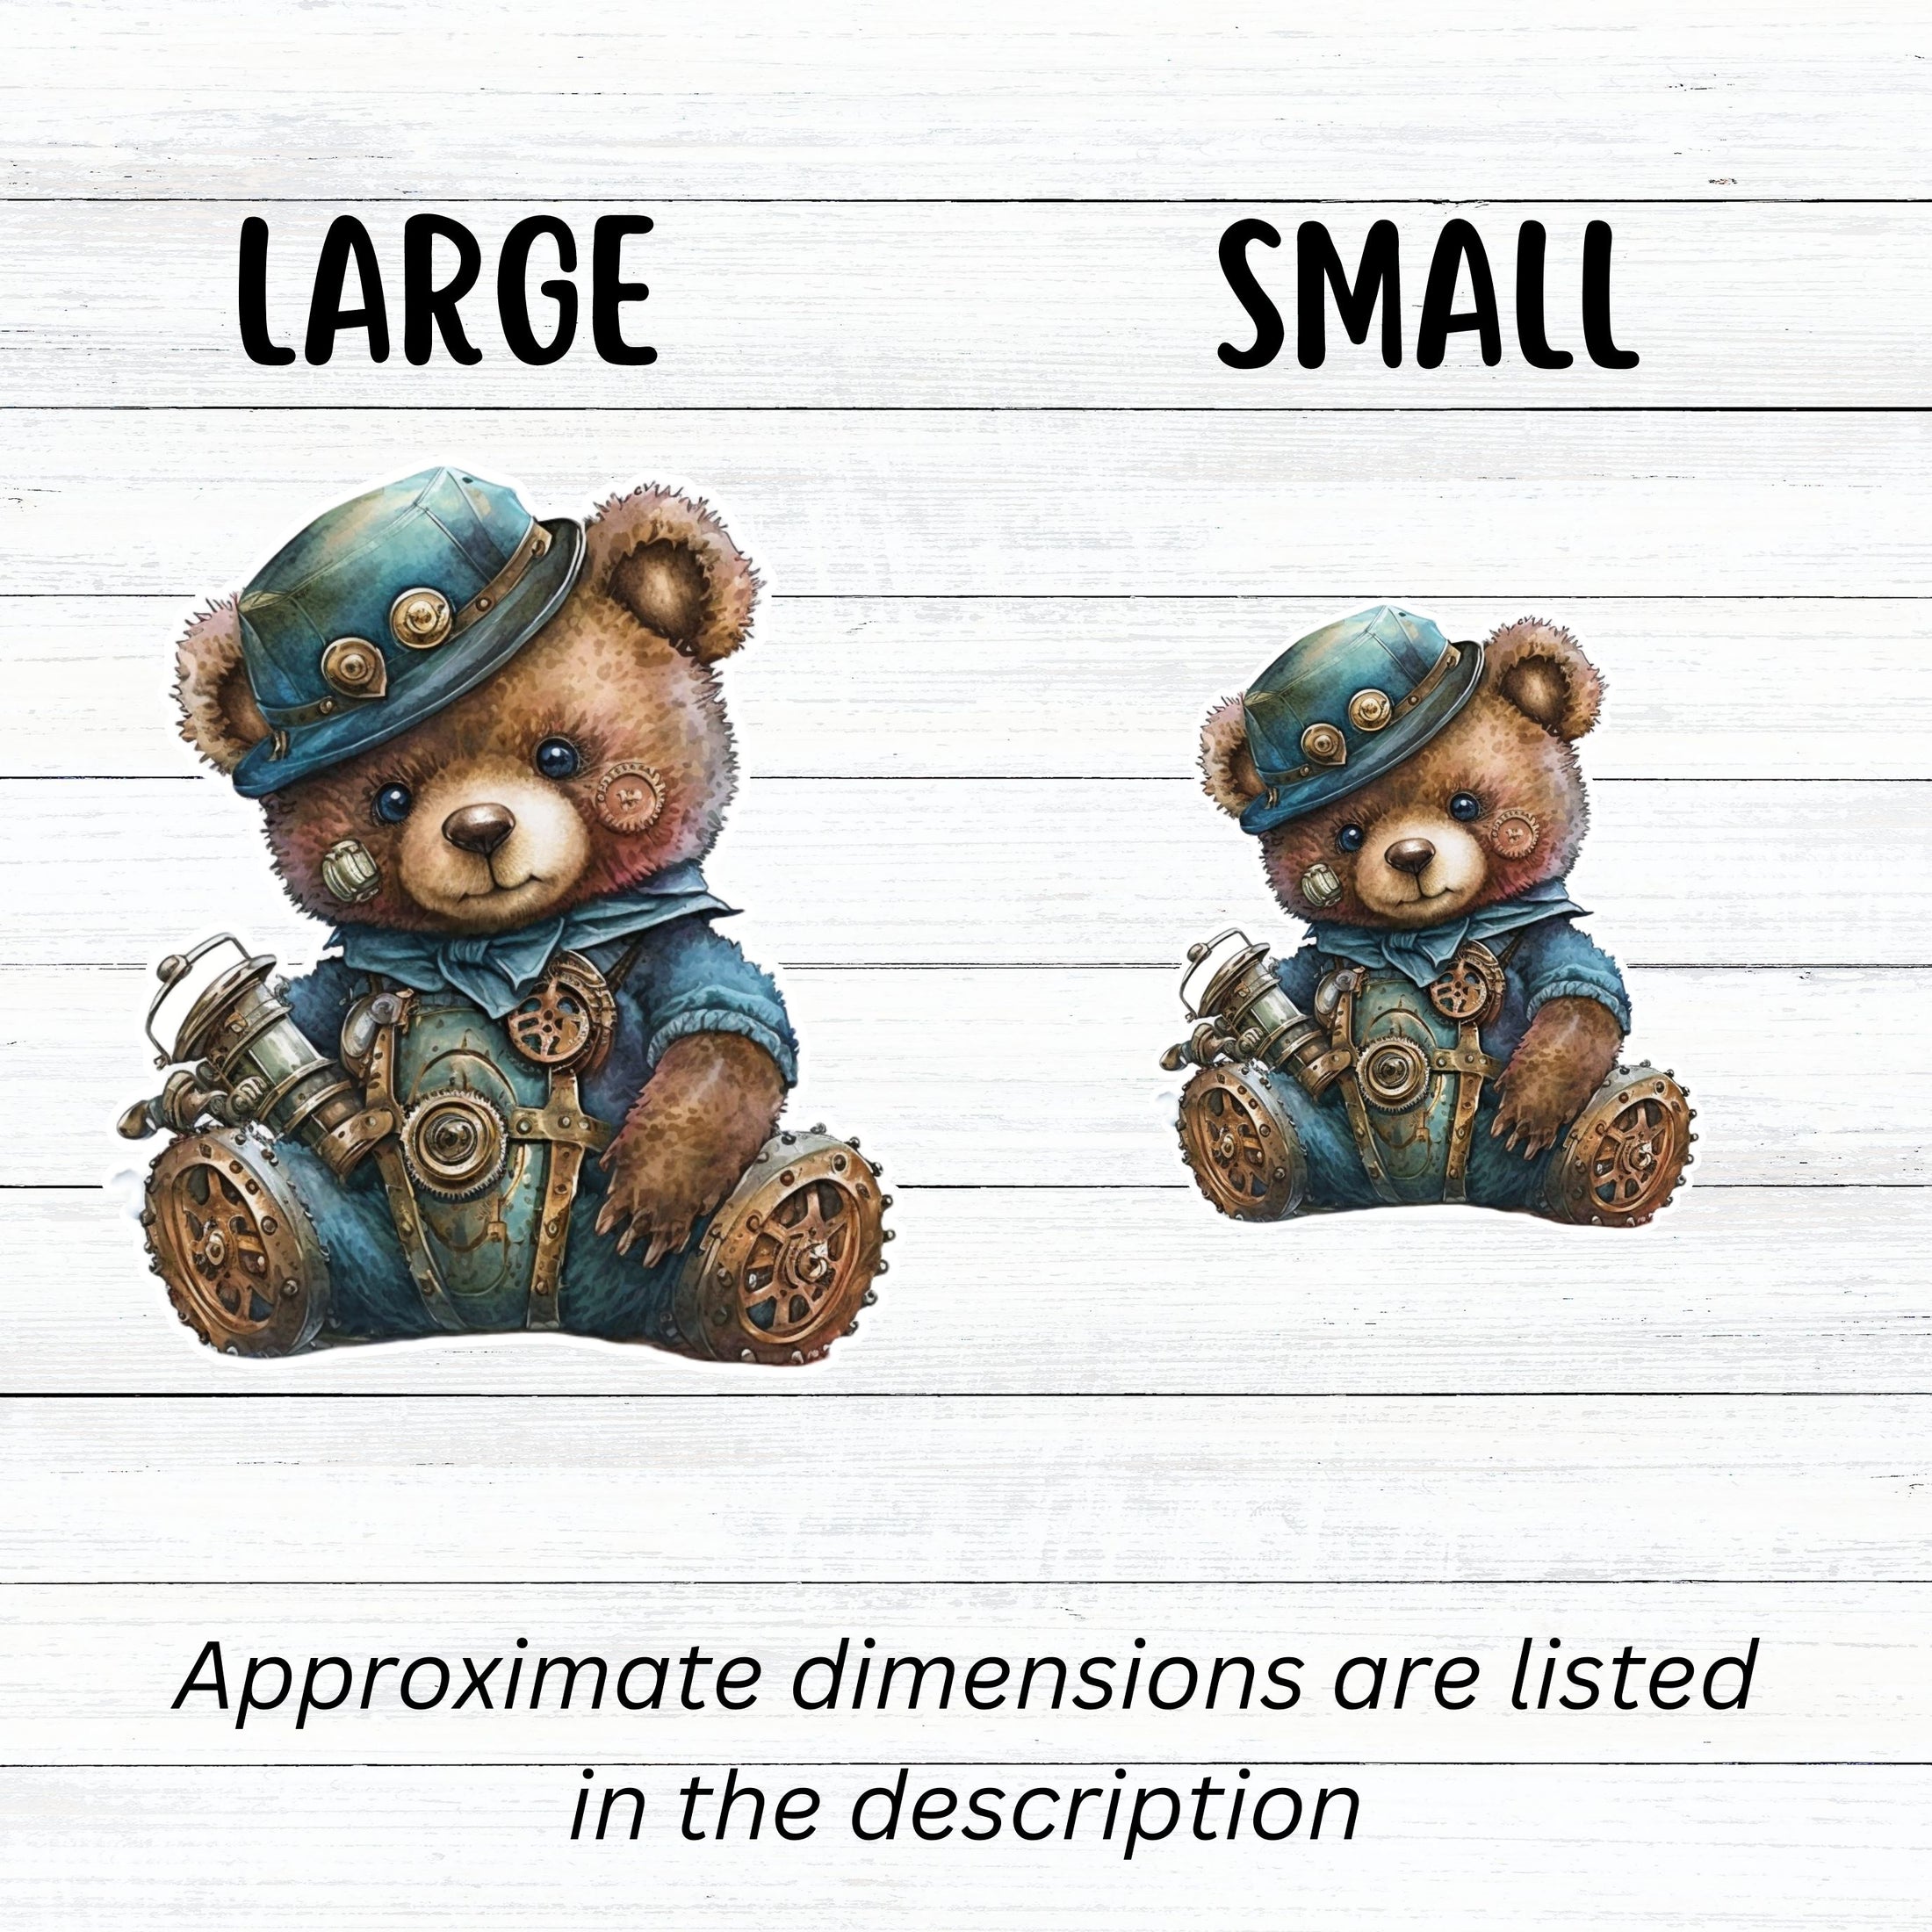 This image shows large and small steampunk teddy stickers next to each other.